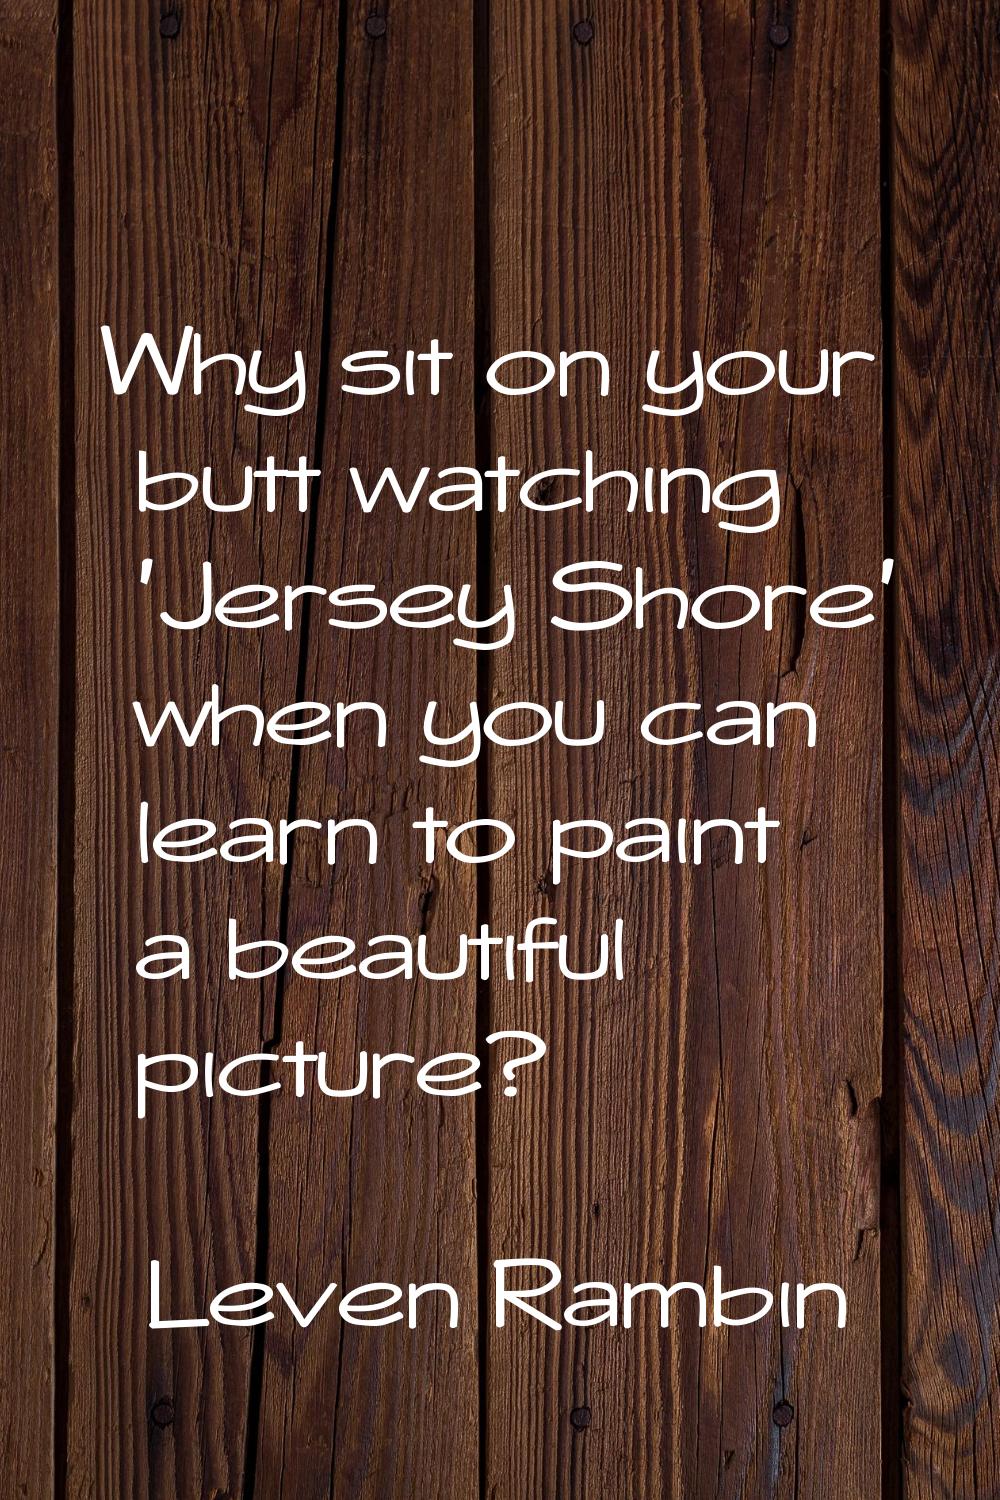 Why sit on your butt watching 'Jersey Shore' when you can learn to paint a beautiful picture?